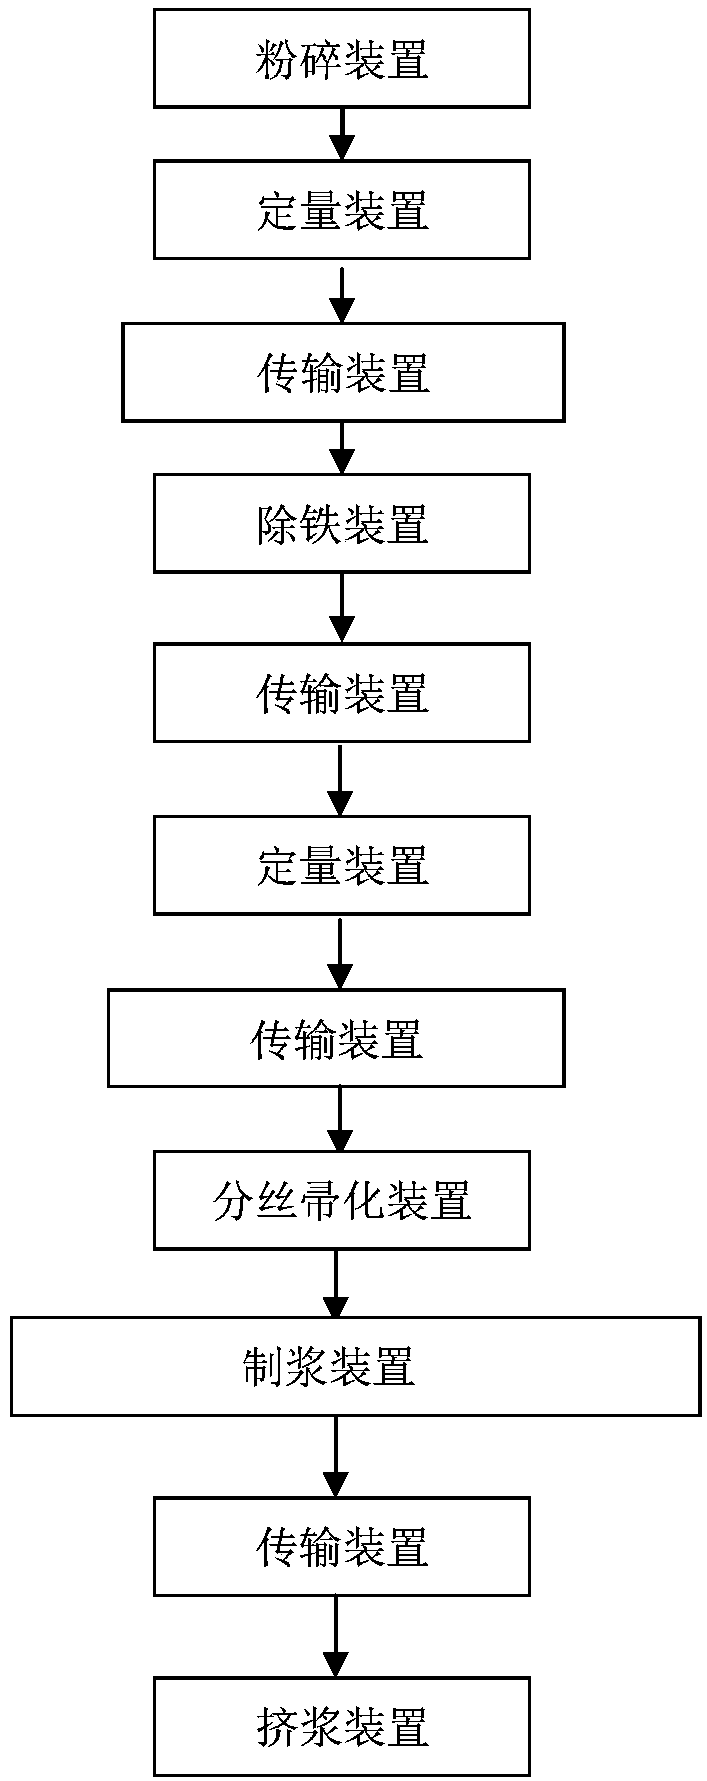 Pulping device, pulping system, paper pulp production equipment constituted by pulping system, and application